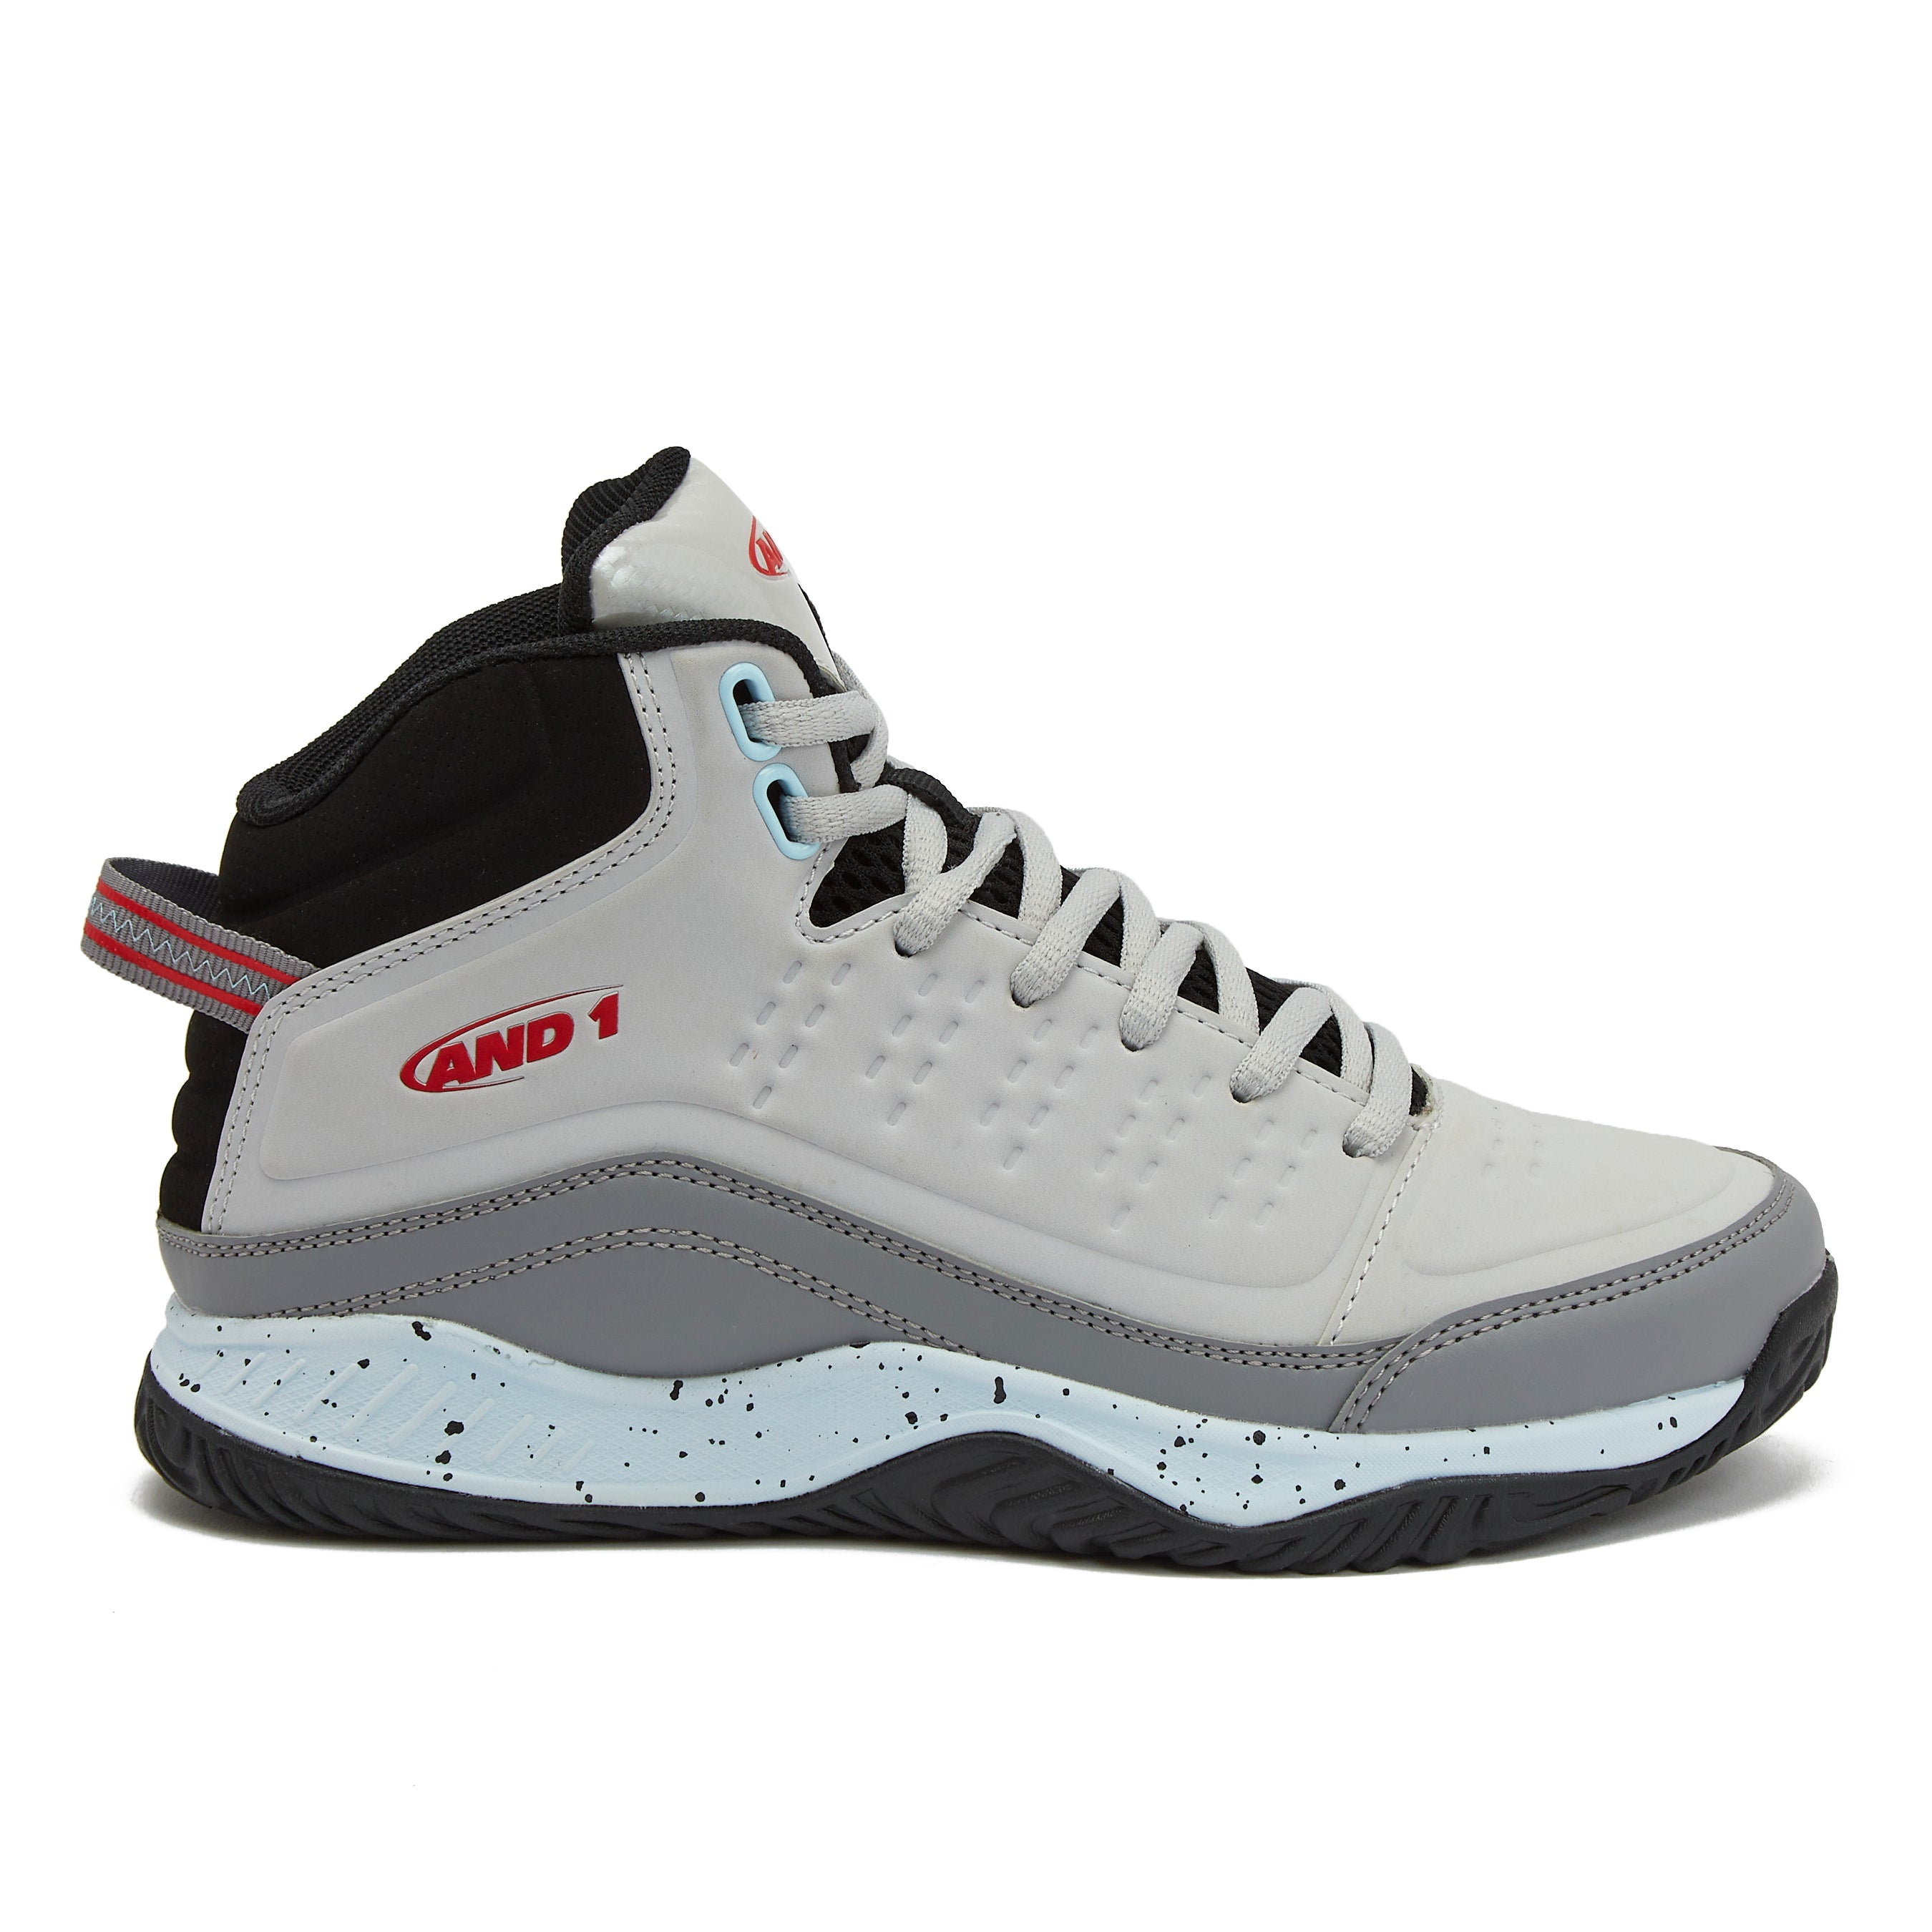 AND1 JUNIOR PULSE WHITE/GREY BASKETBALL SHOE – INSPORT